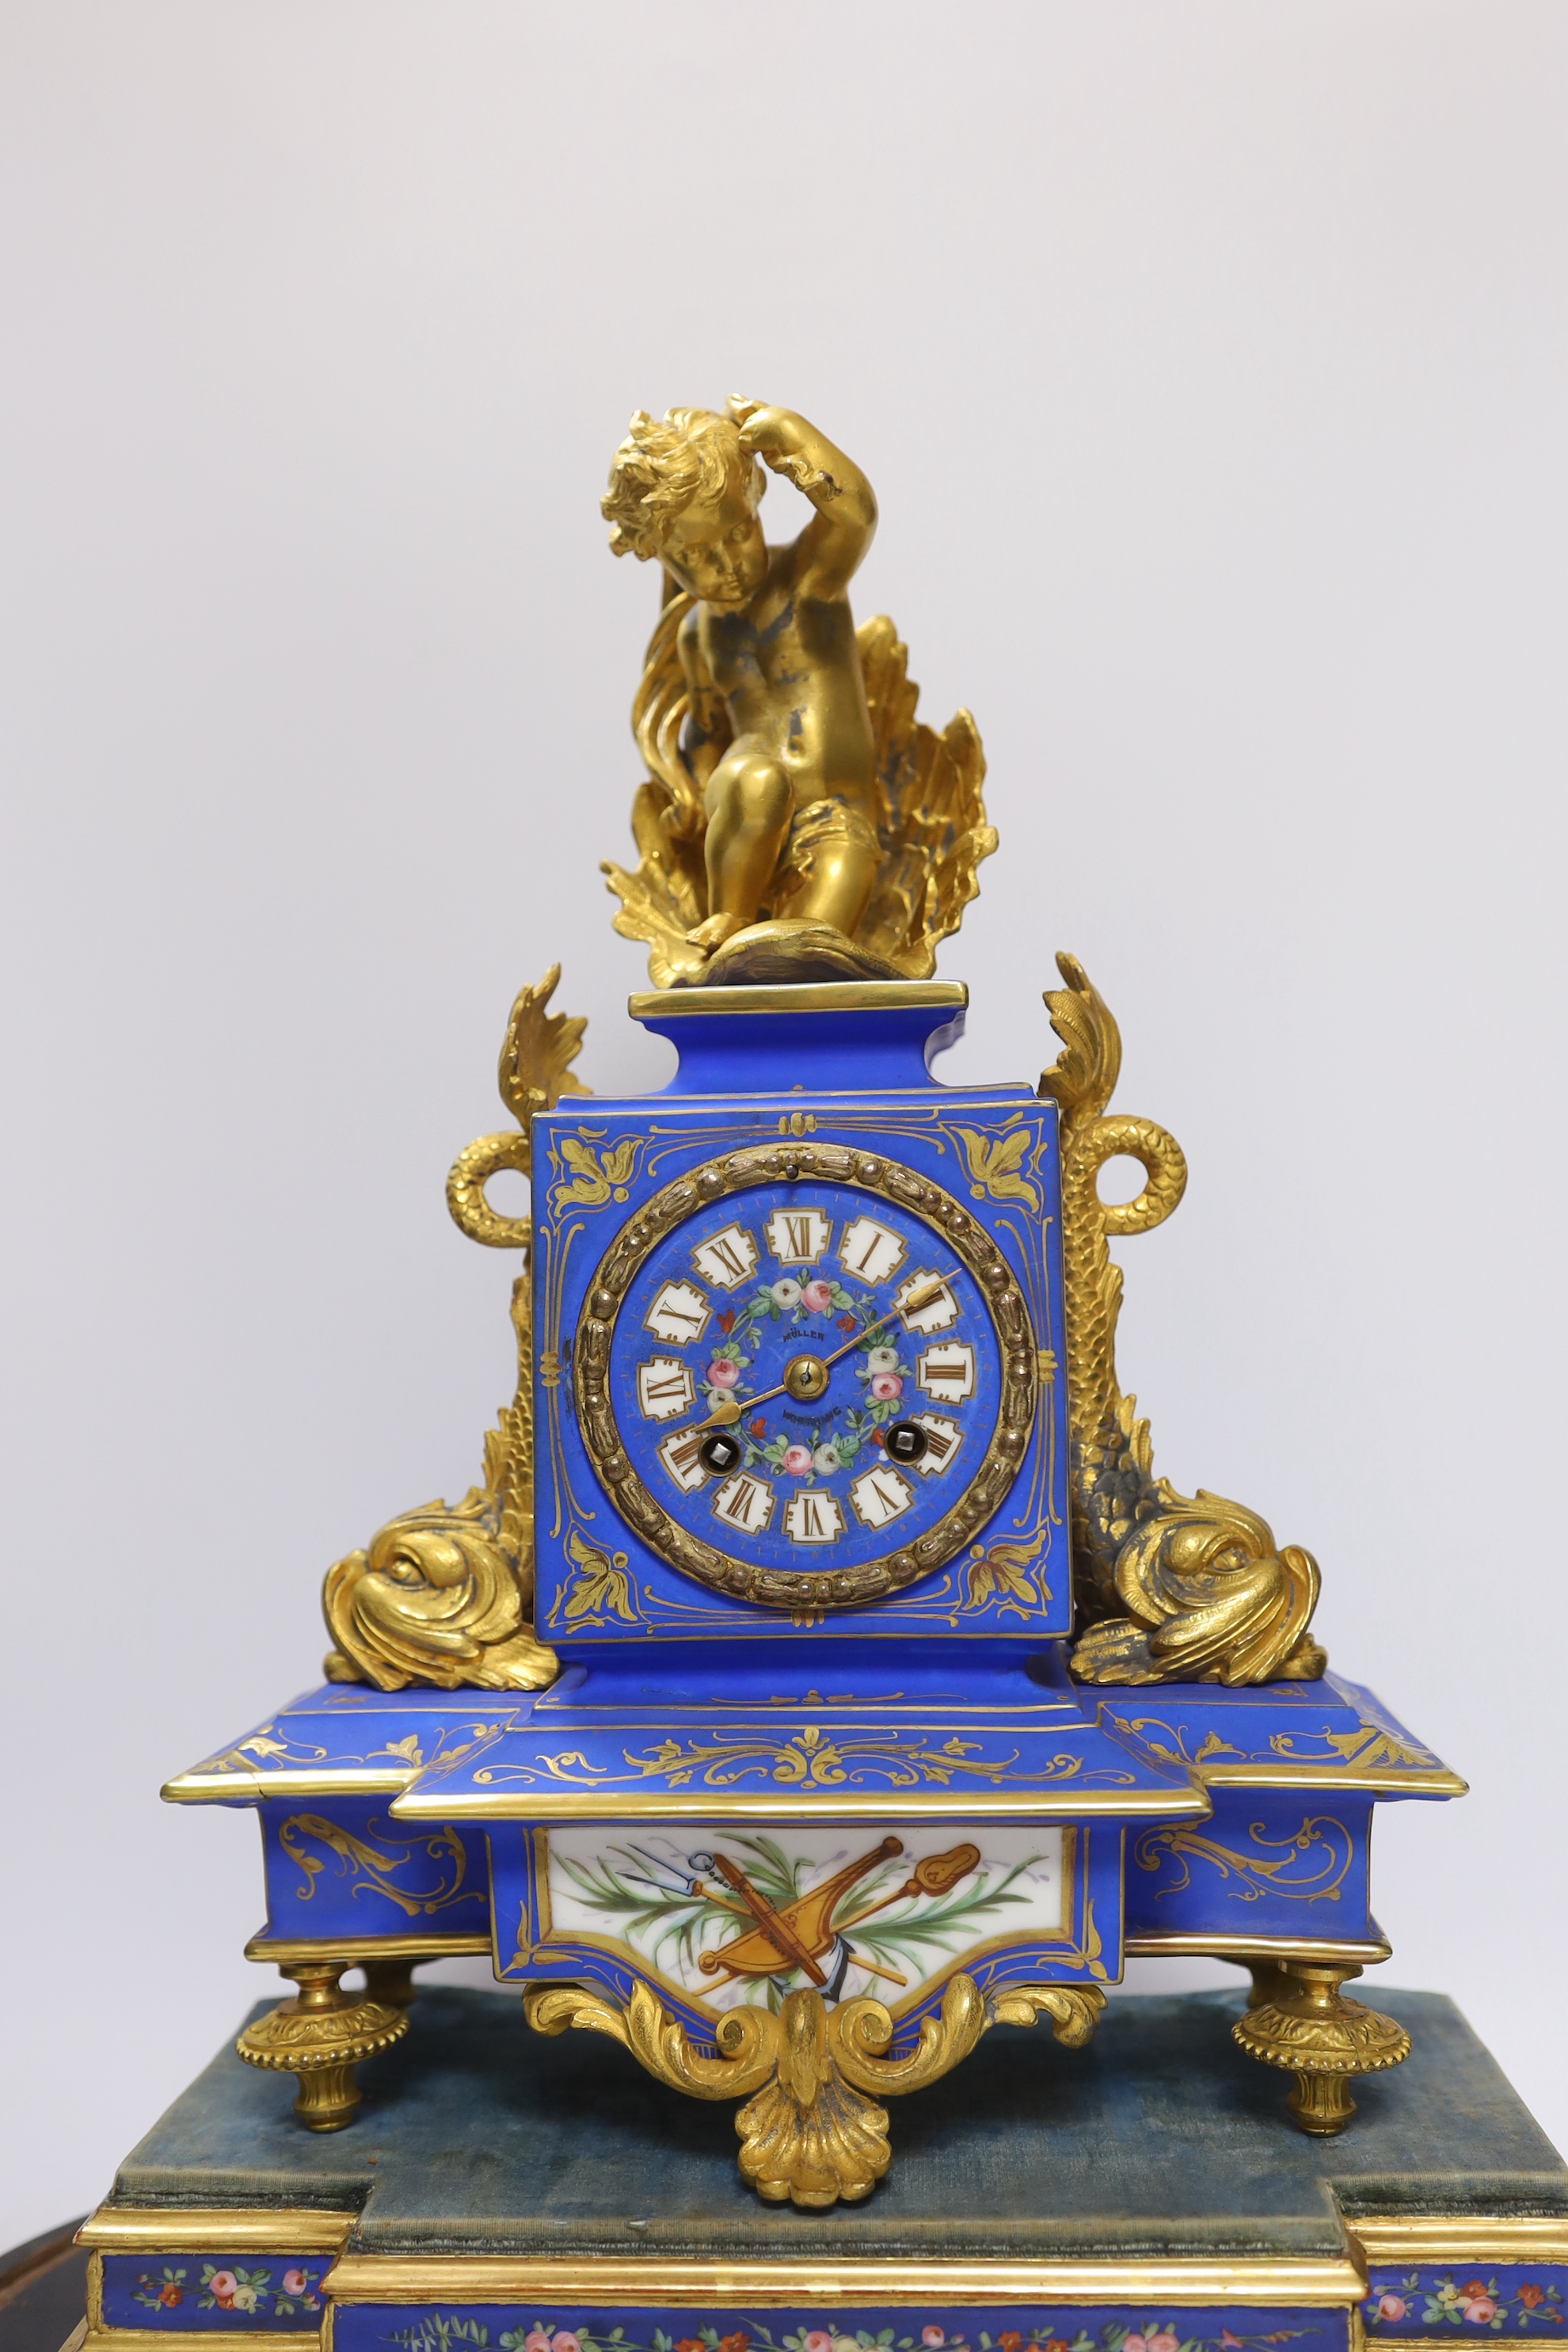 A 19th century French porcelain and gilt mantel clock under glass dome, striking on a bell, the face signed Muller, 48cm high, under dome